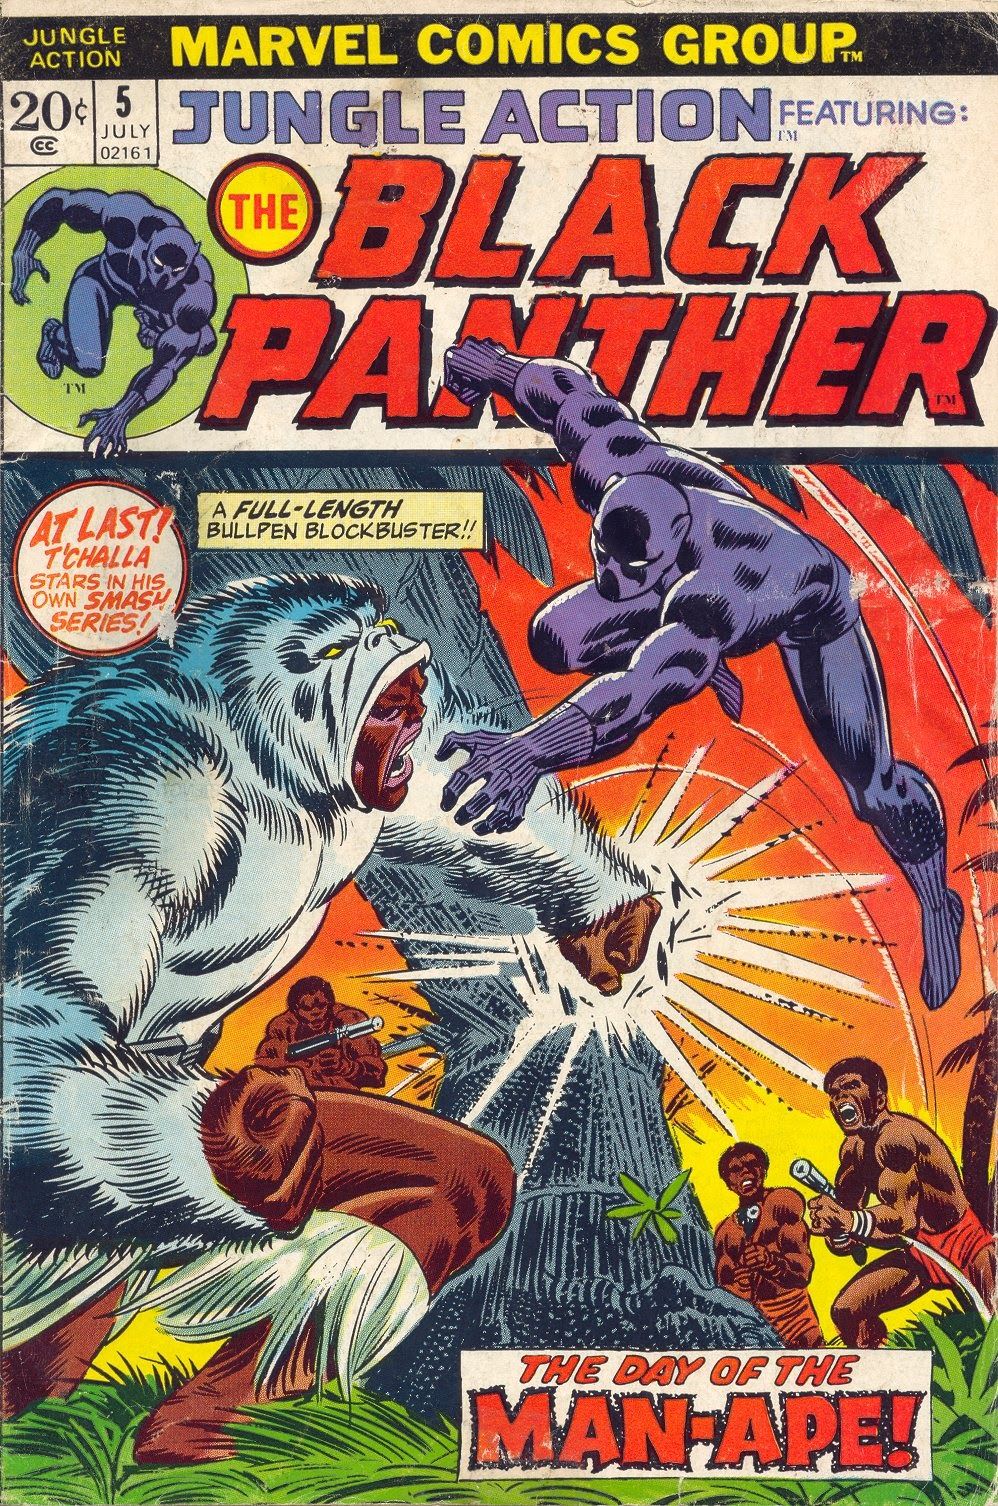 Marvel Fixed Black Panther by Ignoring His Original Comic Title